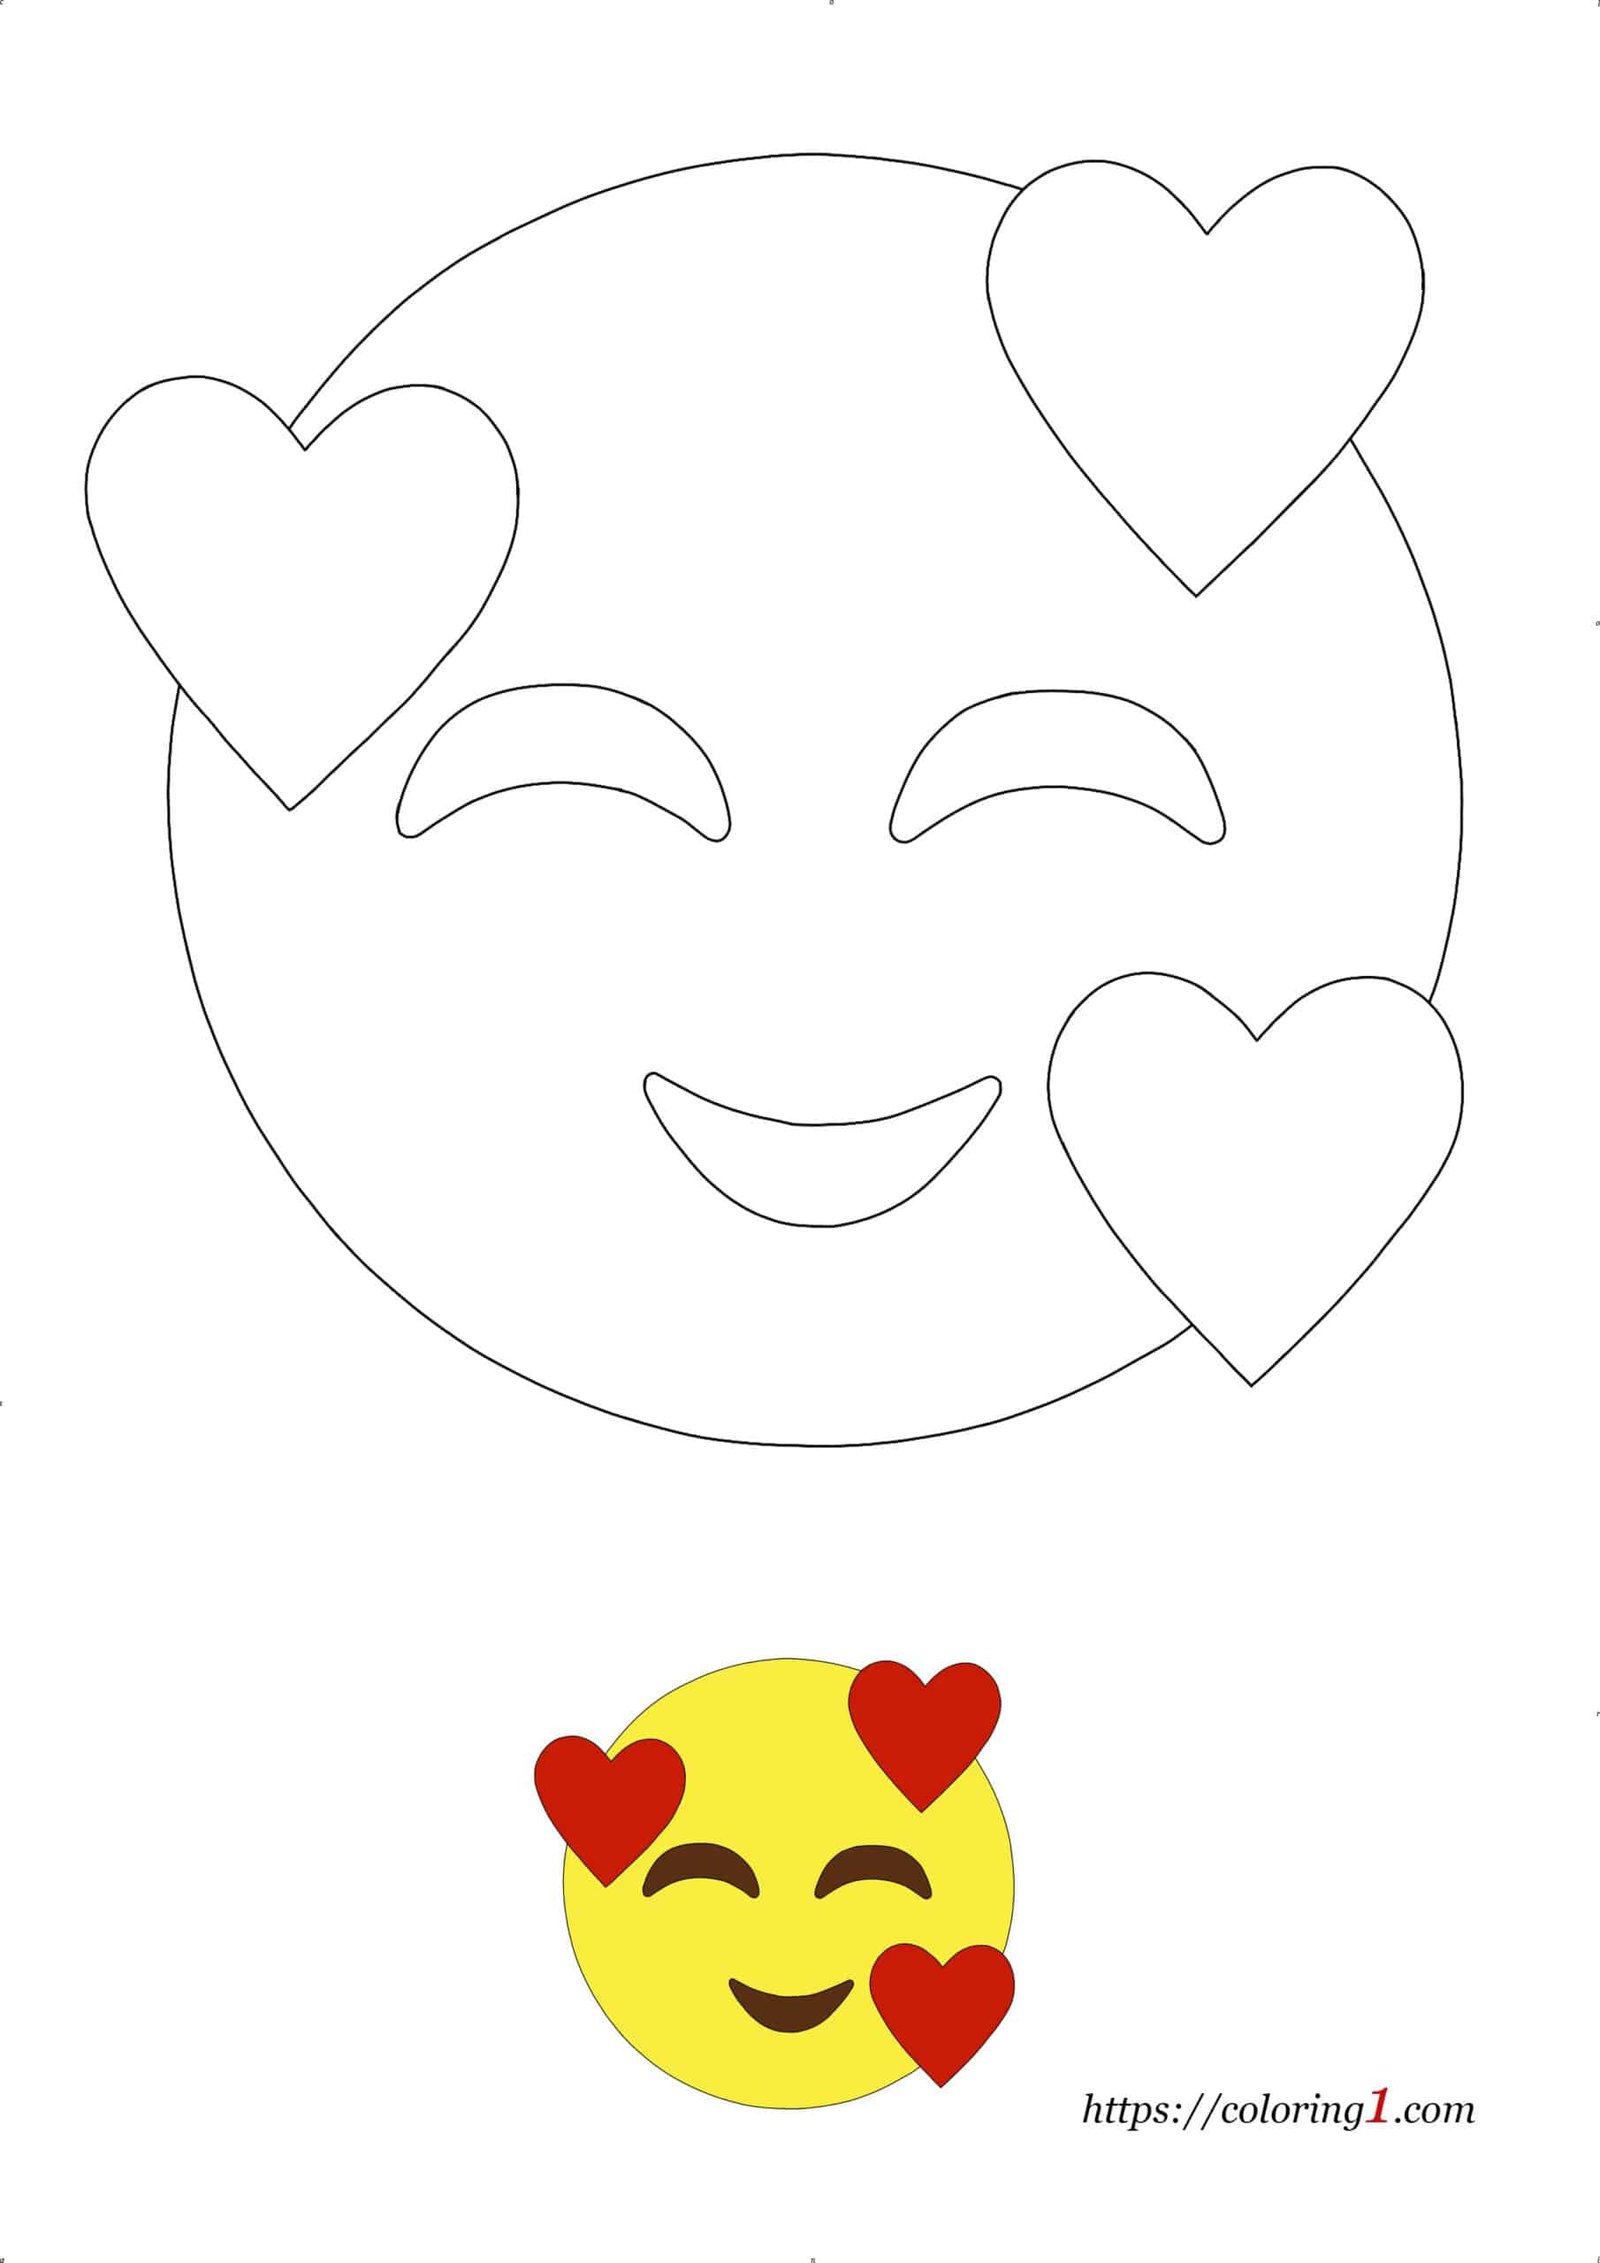 Heart Emoji cute free coloring page for kids